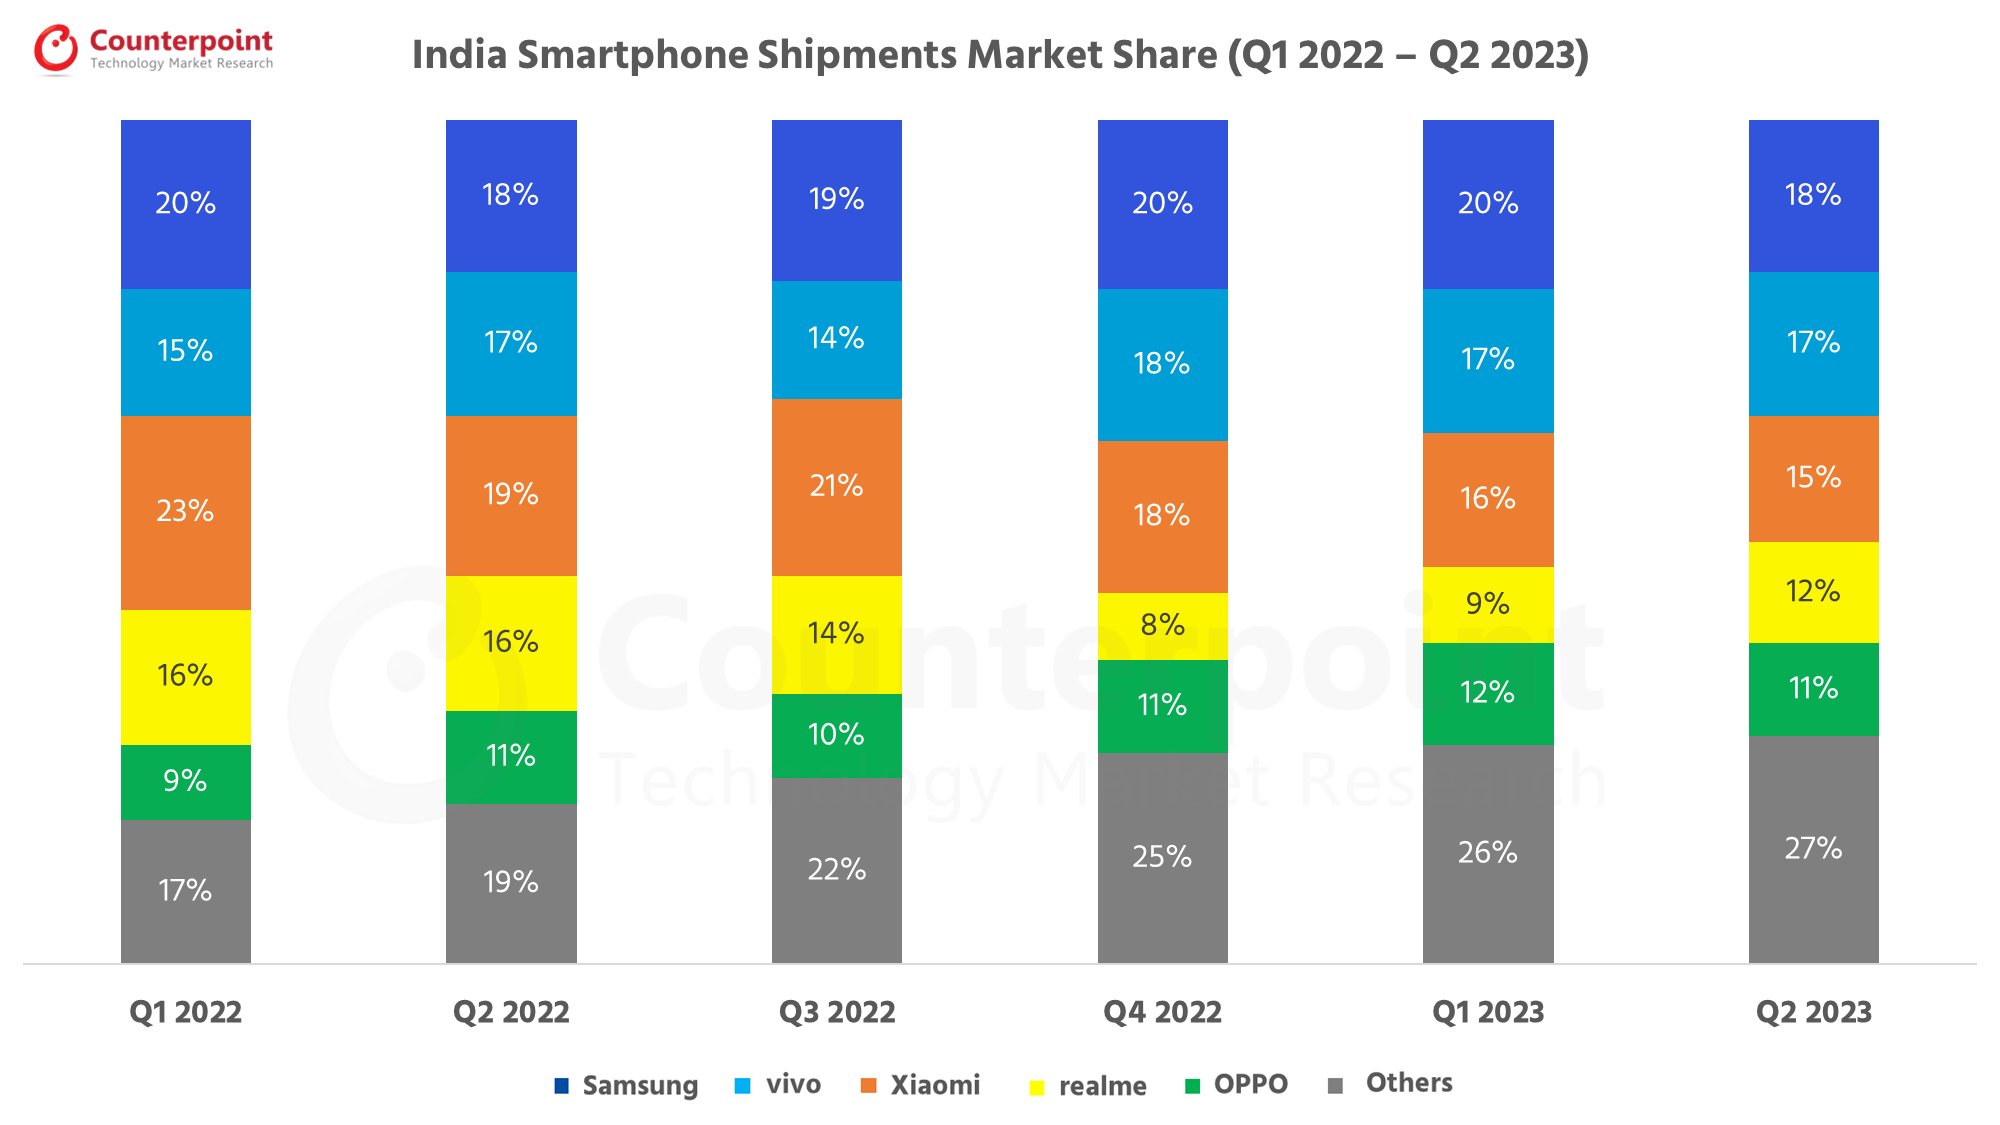 Counterpoint Research India Smartphone Market Share Q2 2023